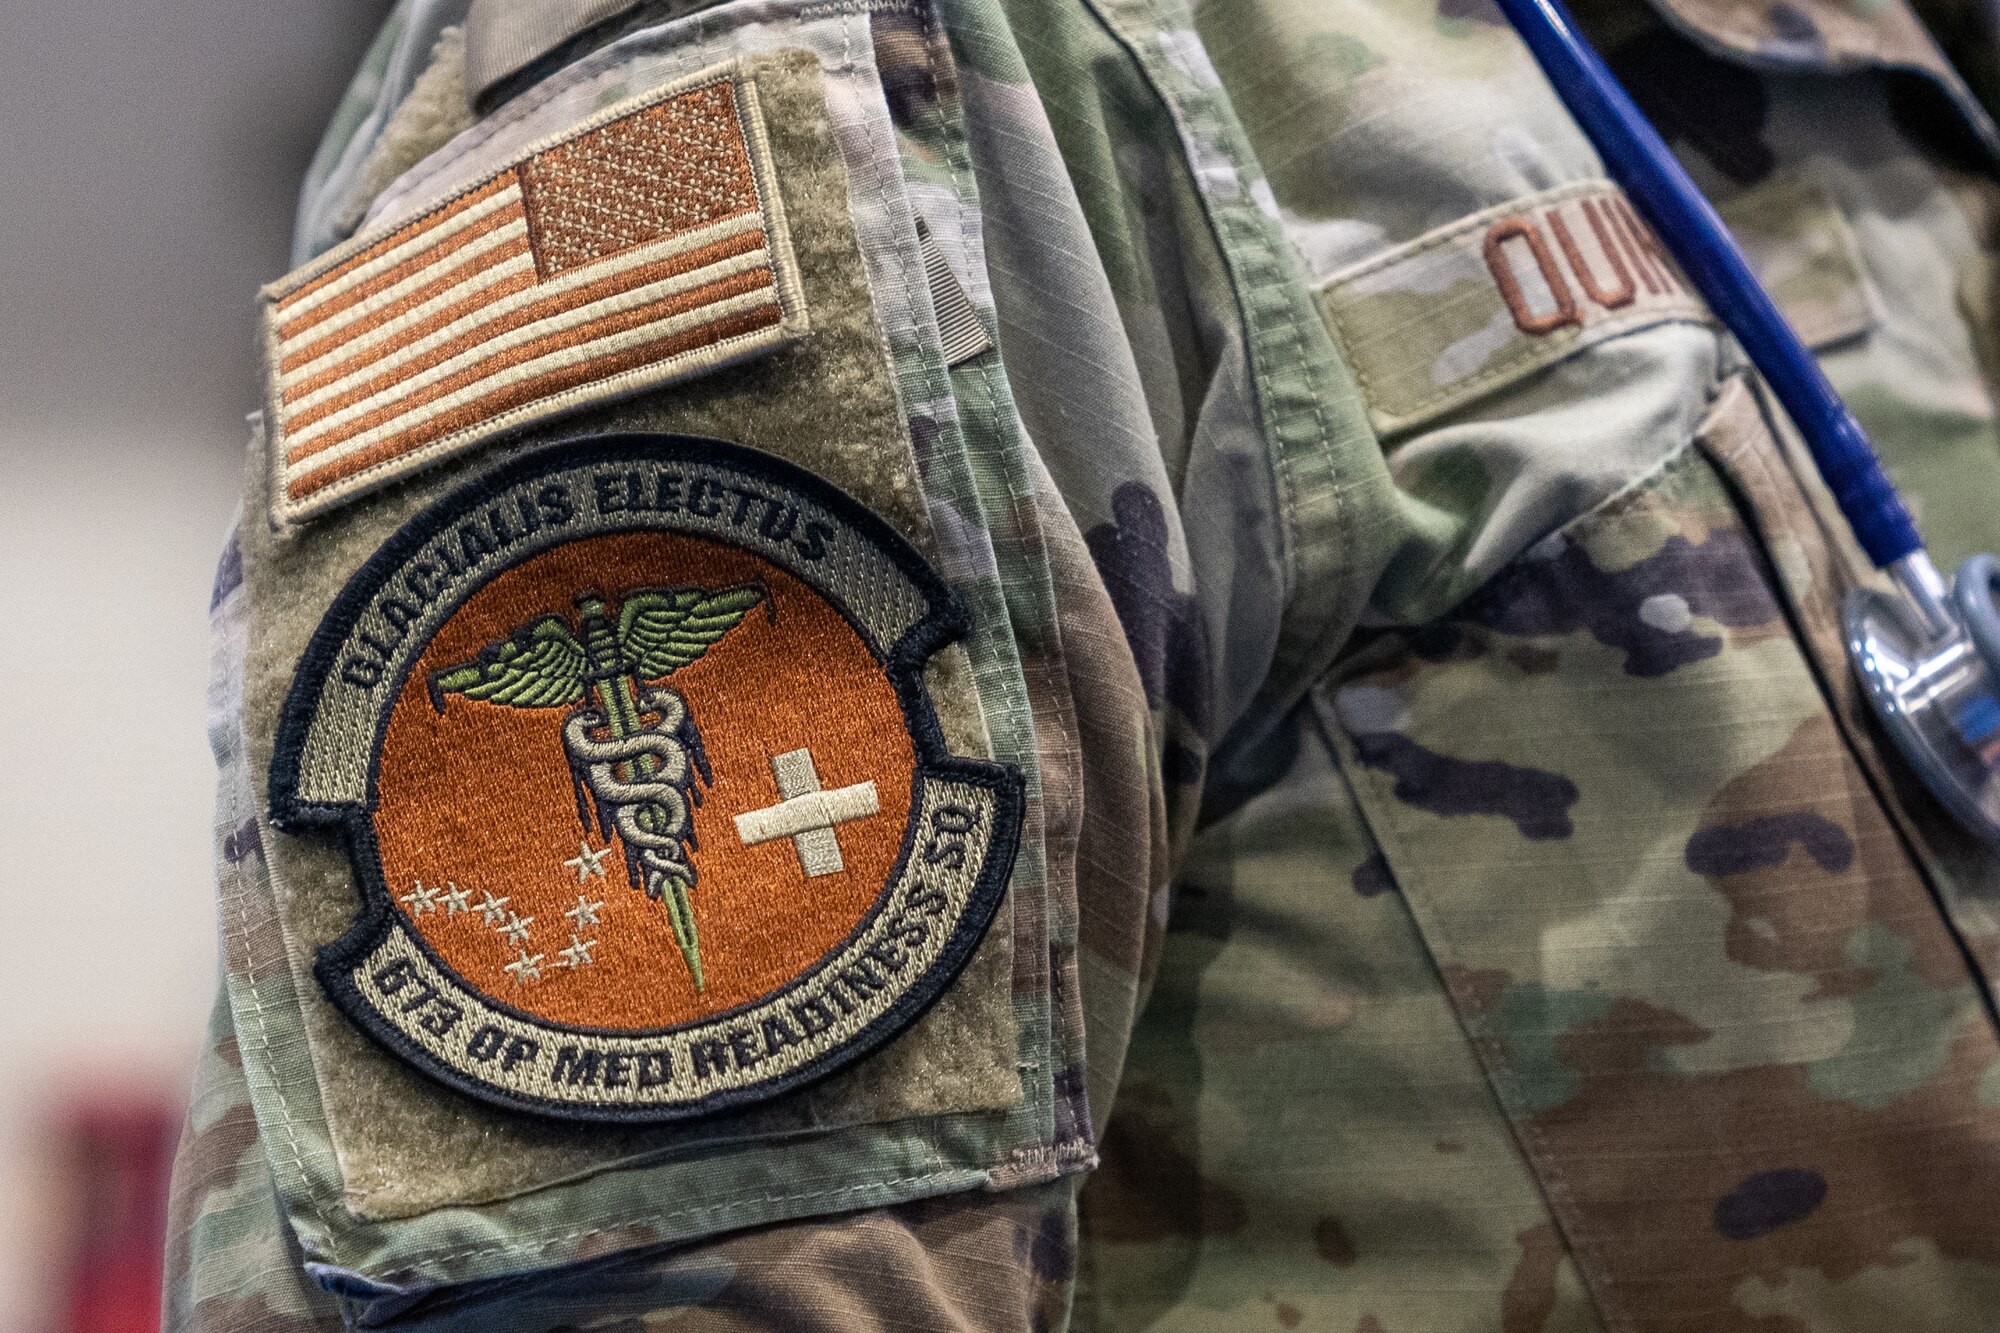 A circular patch depicting medical imagery and the Big Dipper sits below an American Flag patch on the side of a uniform